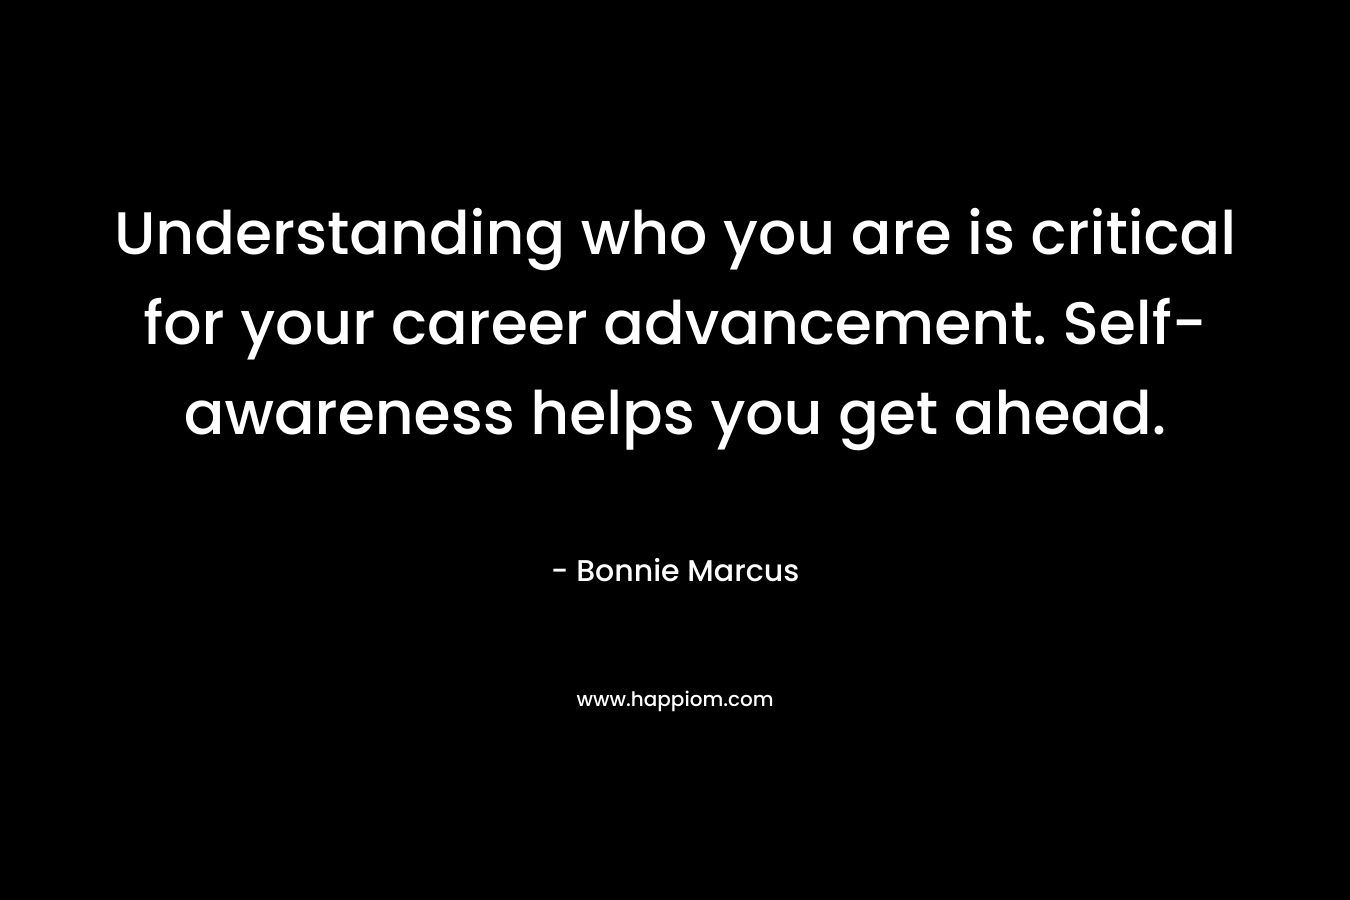 Understanding who you are is critical for your career advancement. Self-awareness helps you get ahead.